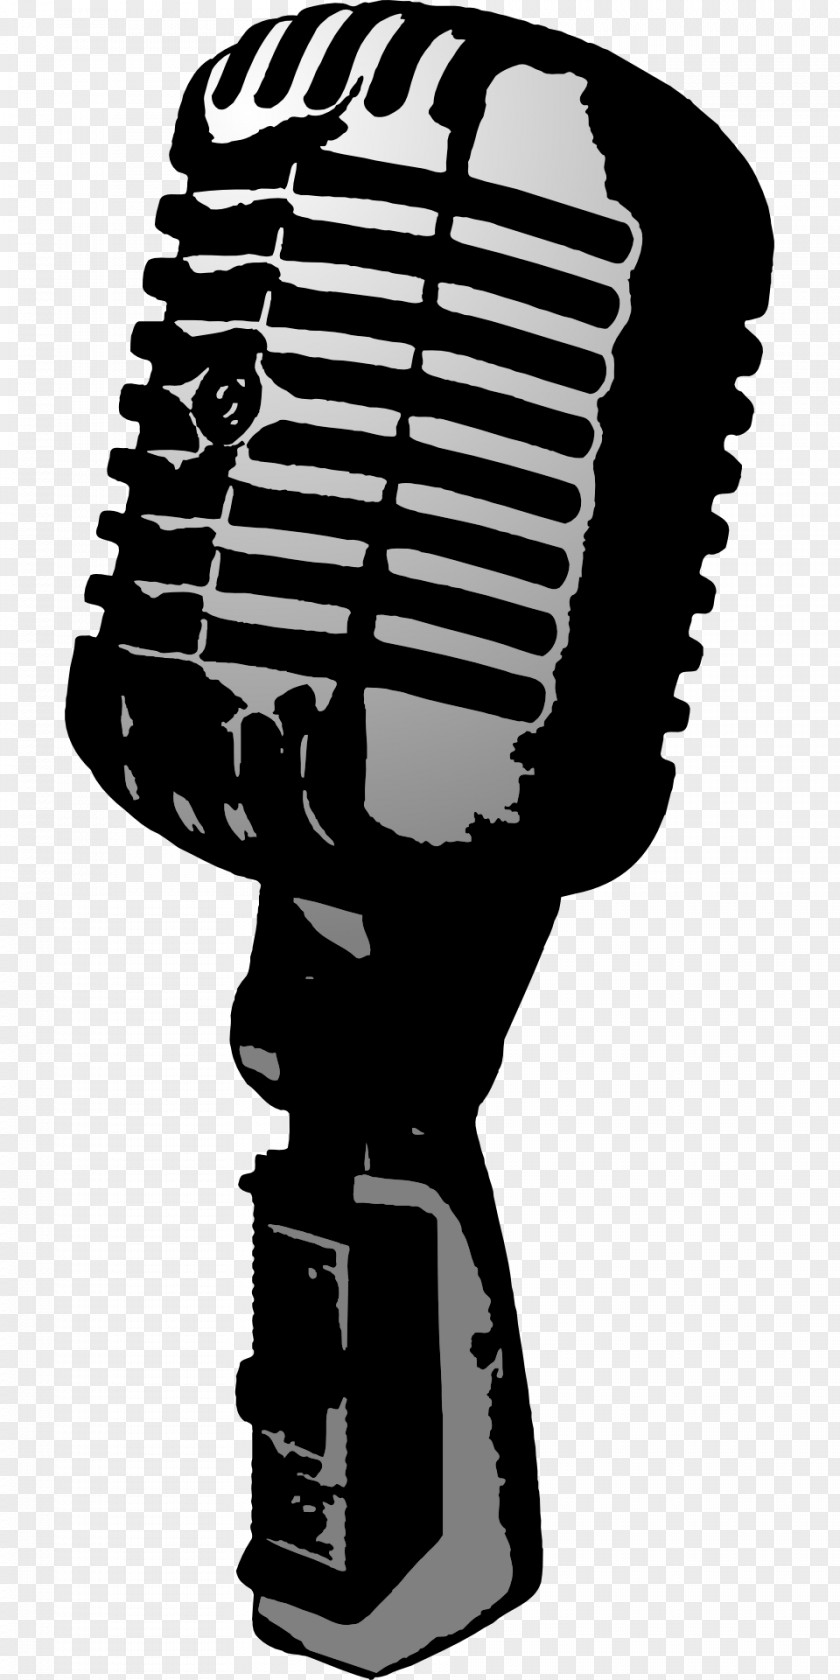 Microphone Clip Art Openclipart Image Illustration PNG